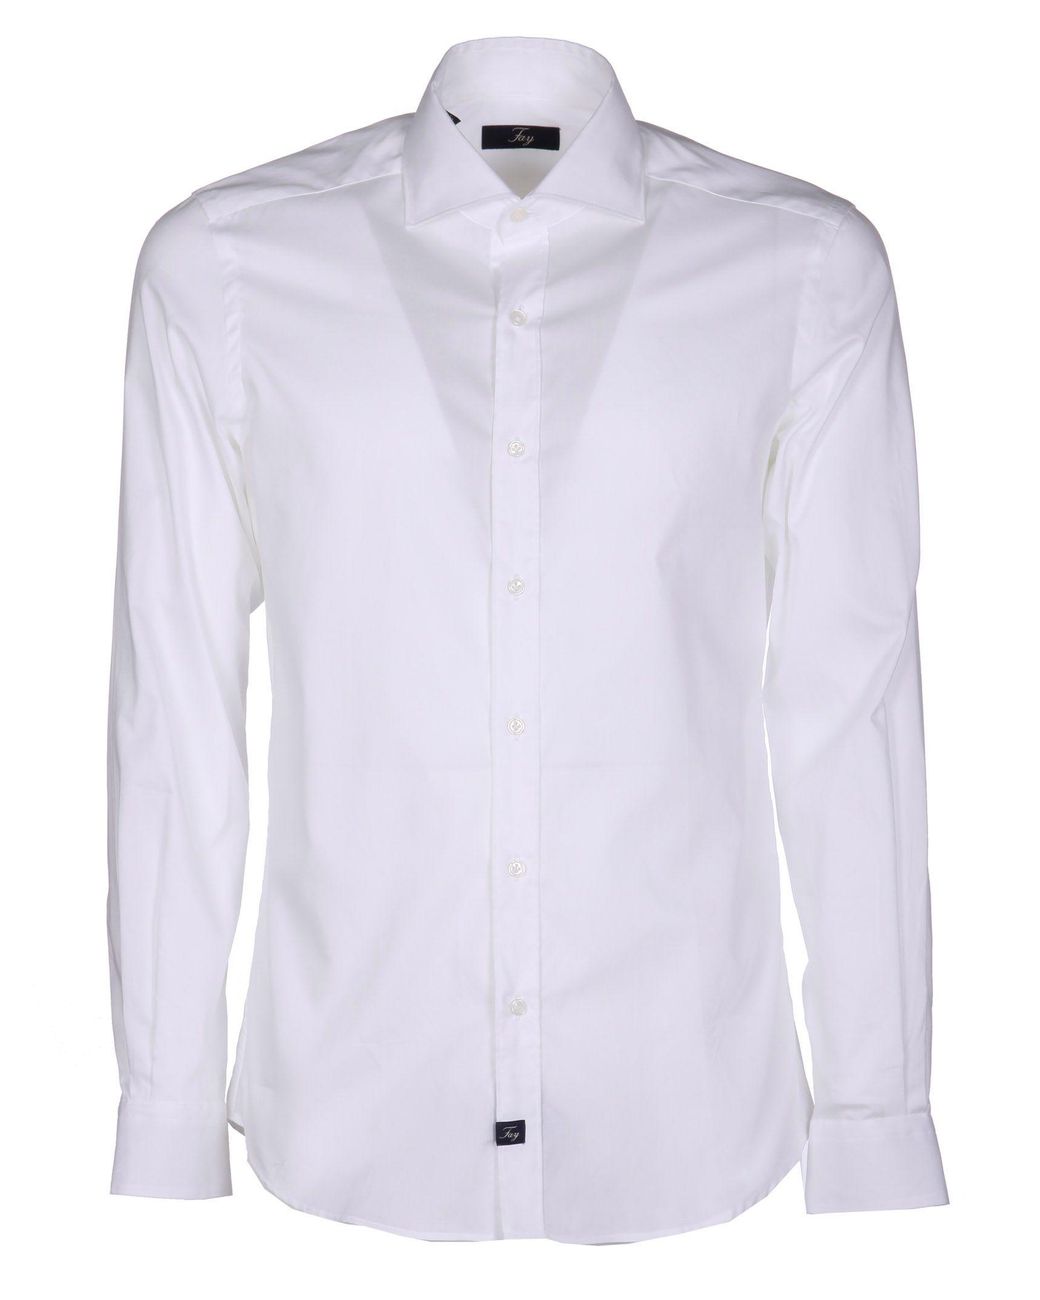 Fay Cotton Shirt in White for Men - Lyst